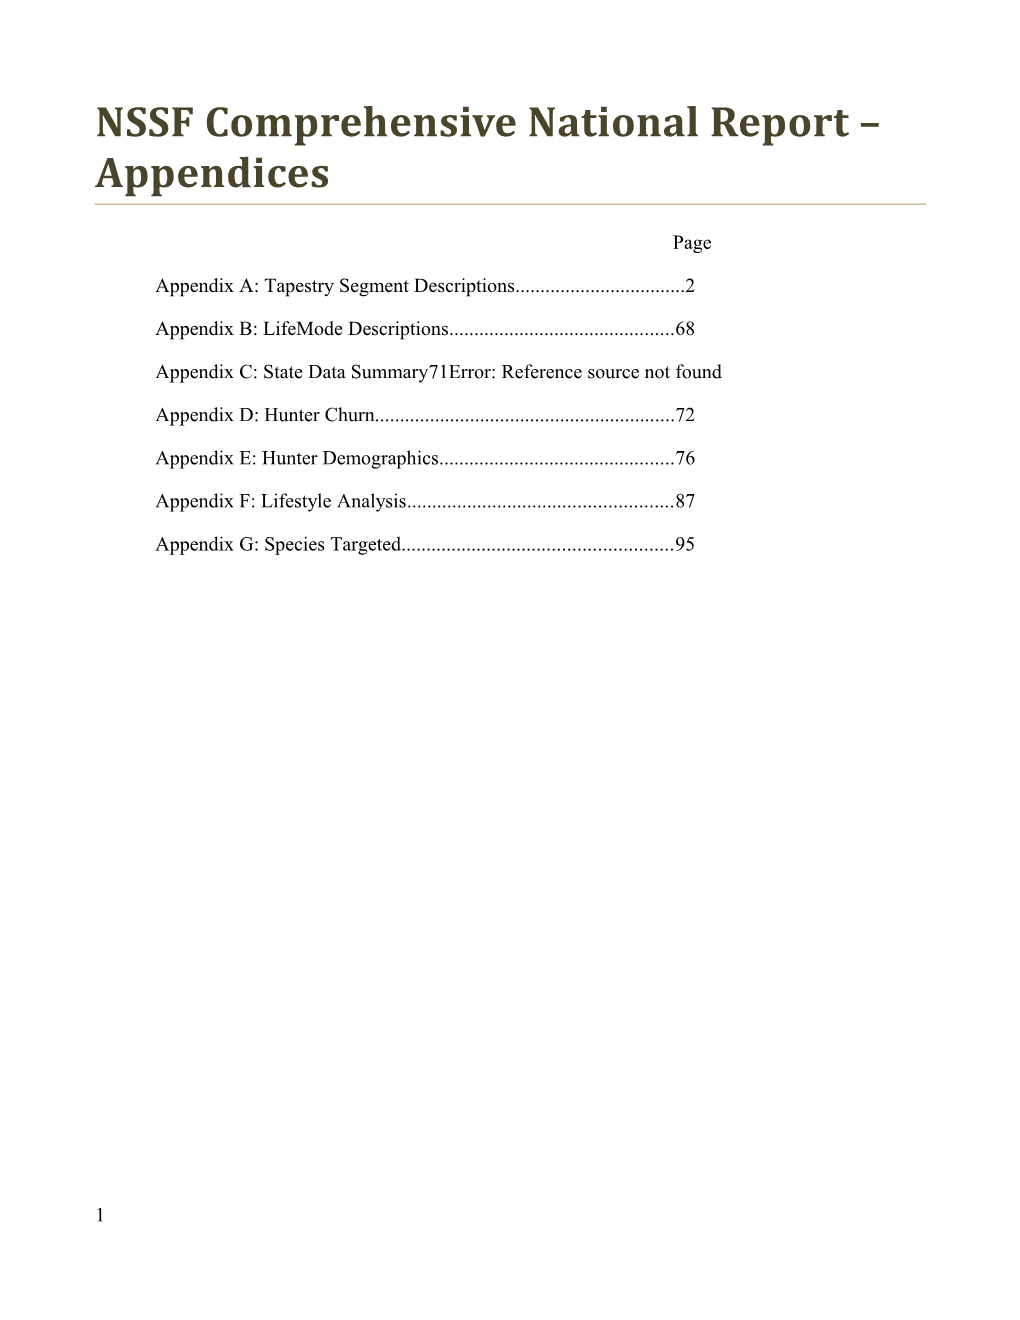 NSSF Comprehensive National Report Appendices